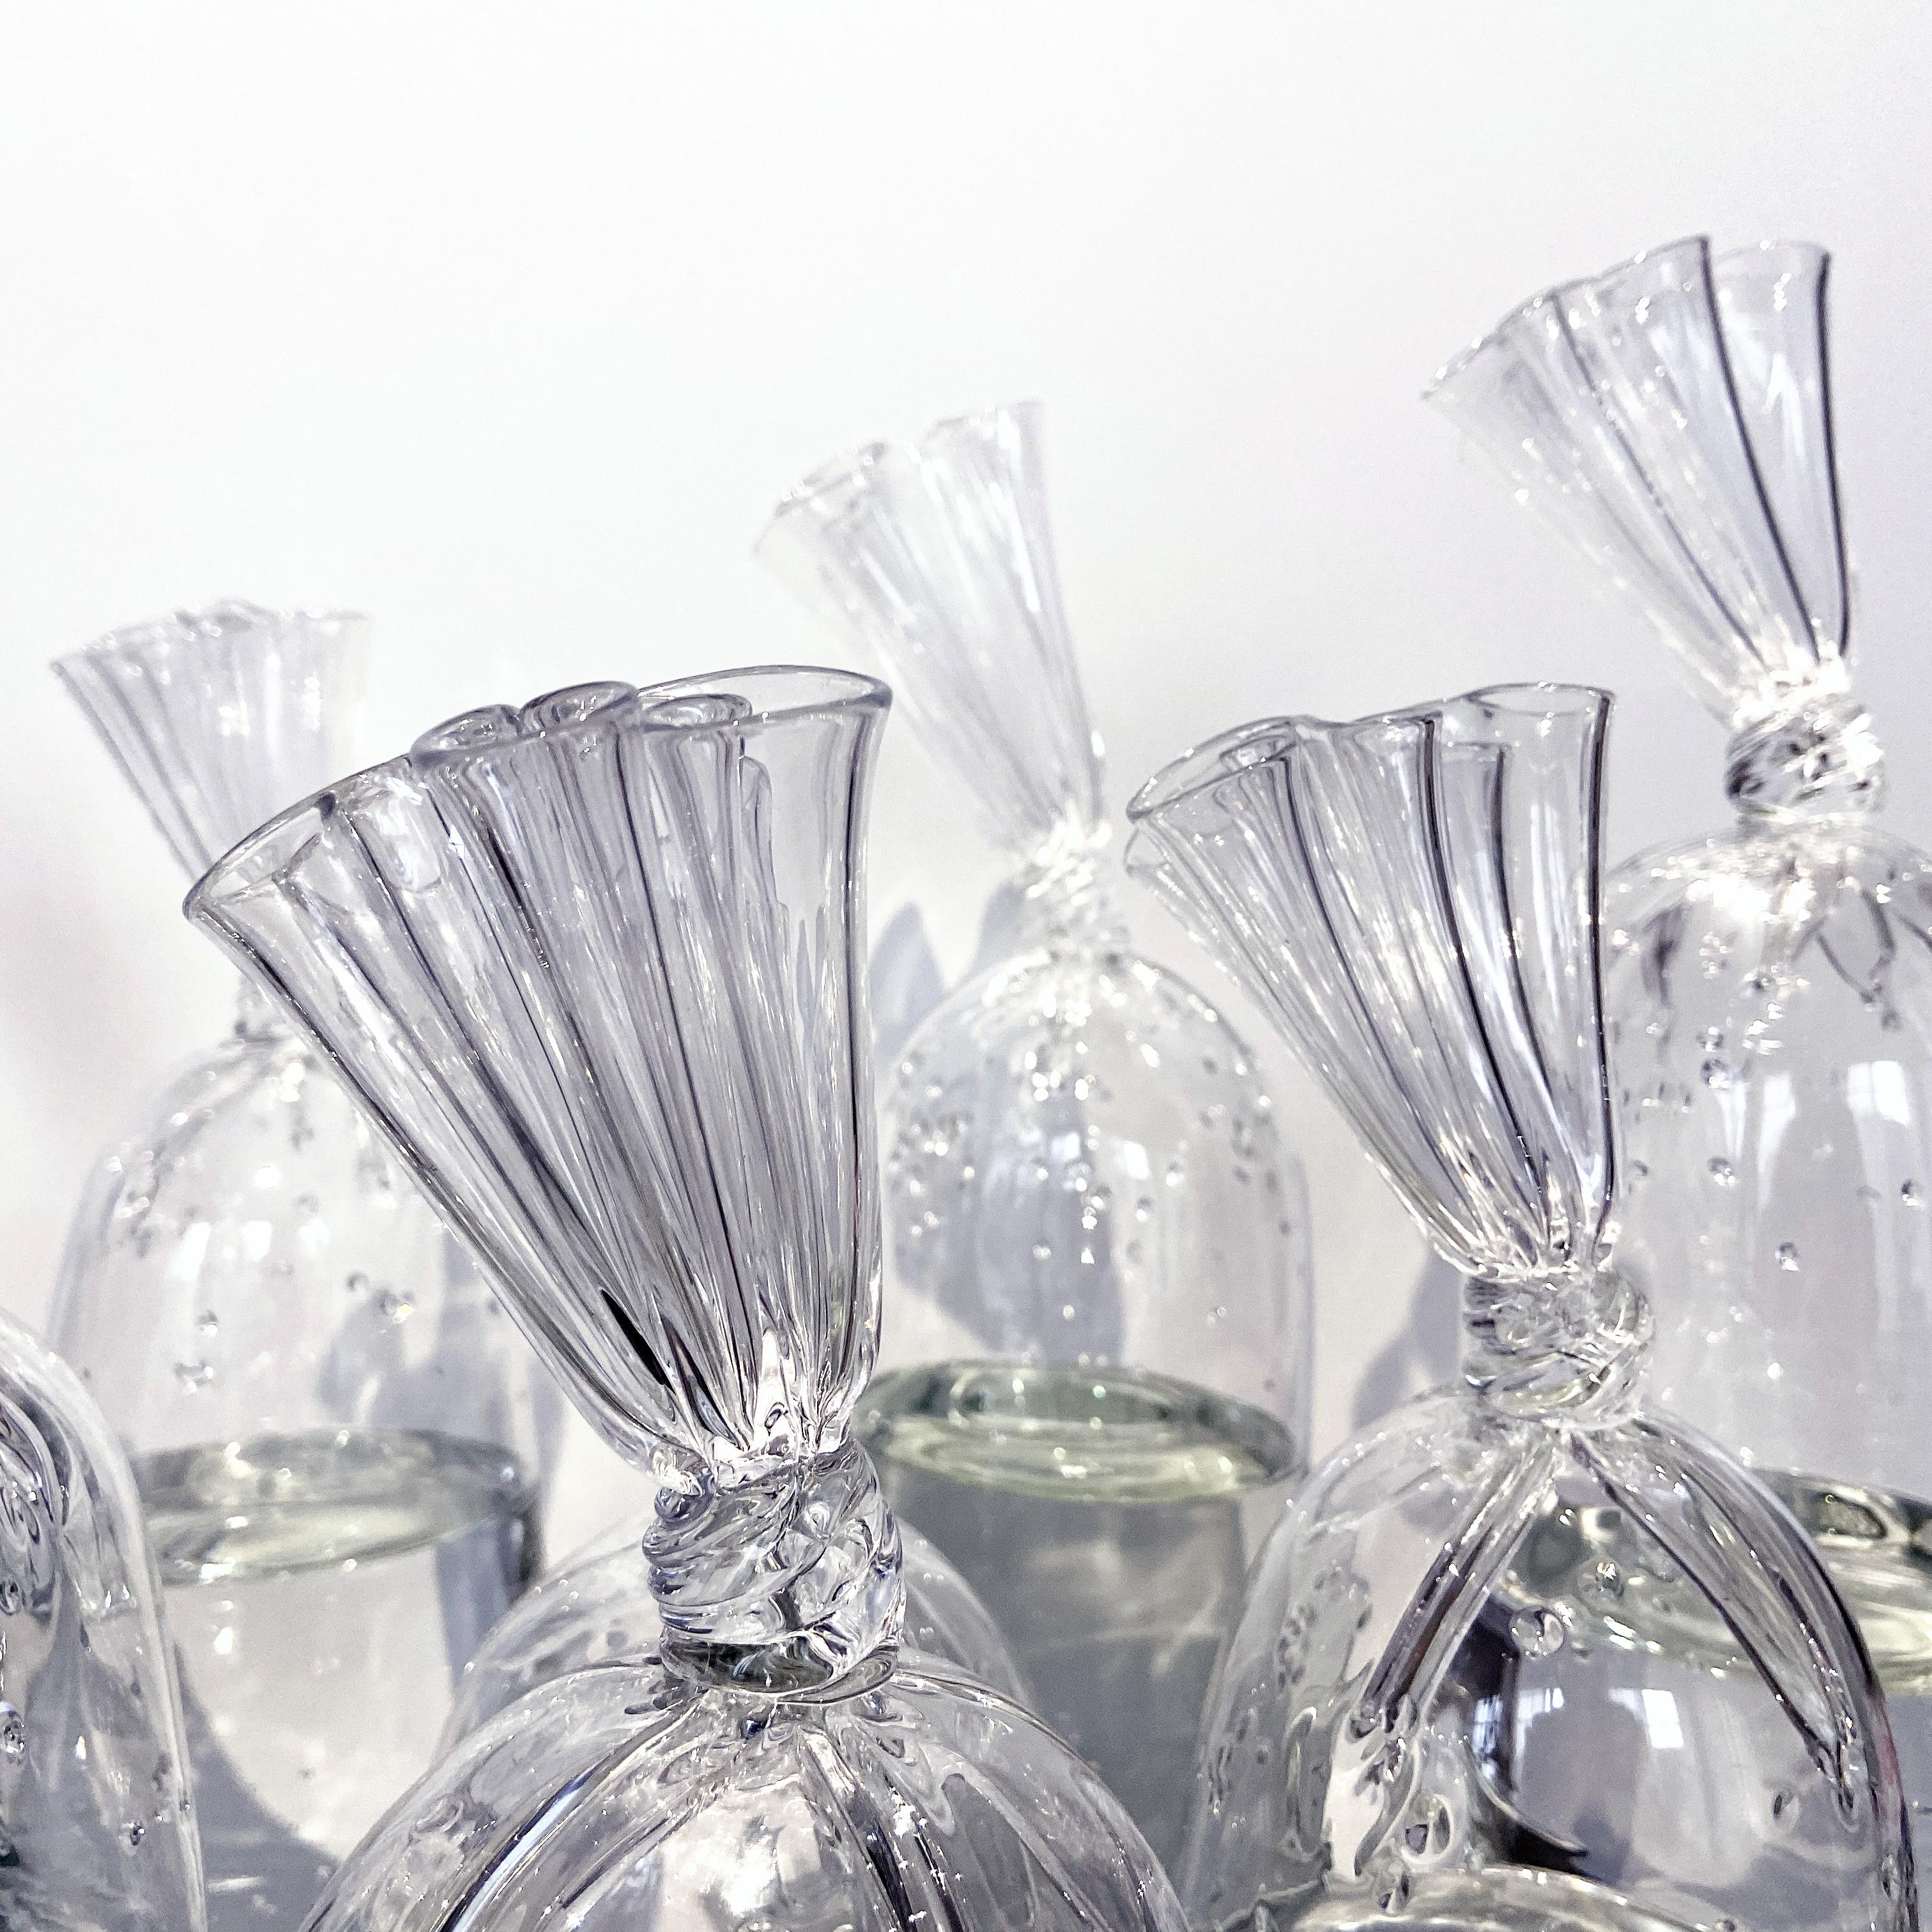  Contemporary Blown Glass: Water Bag X 2